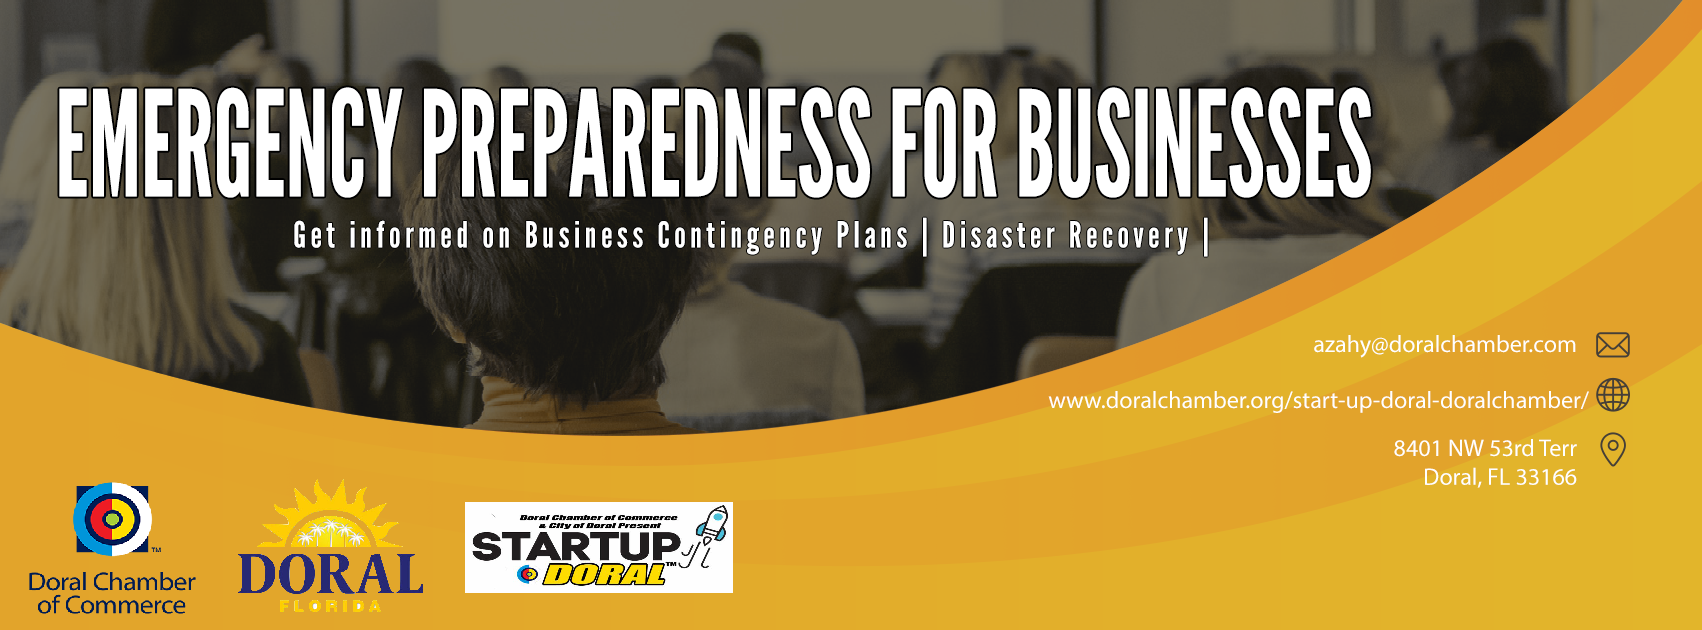 Emergency Preparedness for Business, a Doral Chamber of Commerce event.